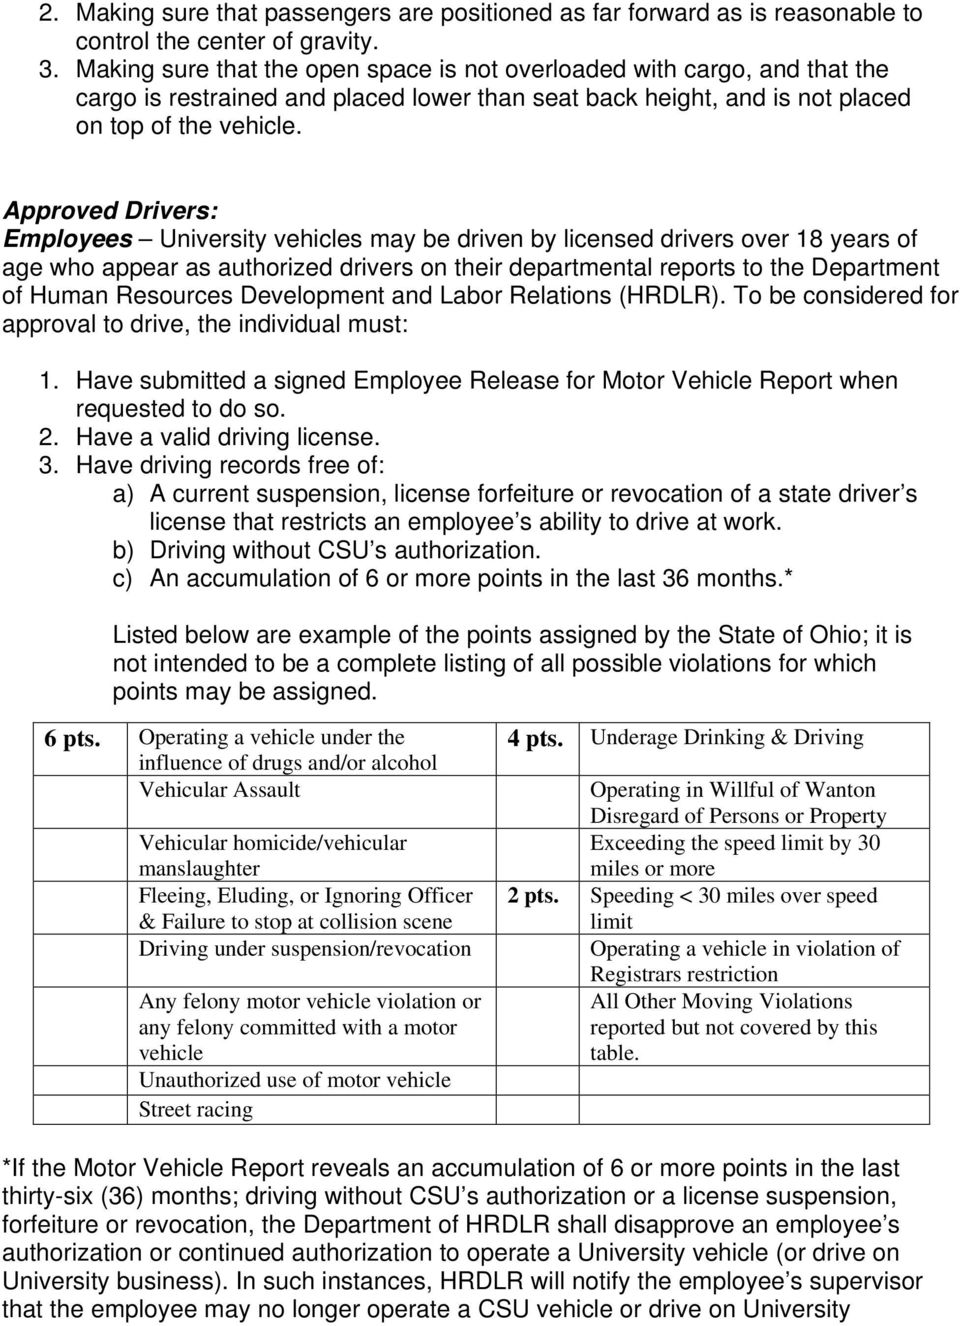 Approved Drivers: Employees University vehicles may be driven by licensed drivers over 18 years of age who appear as authorized drivers on their departmental reports to the Department of Human